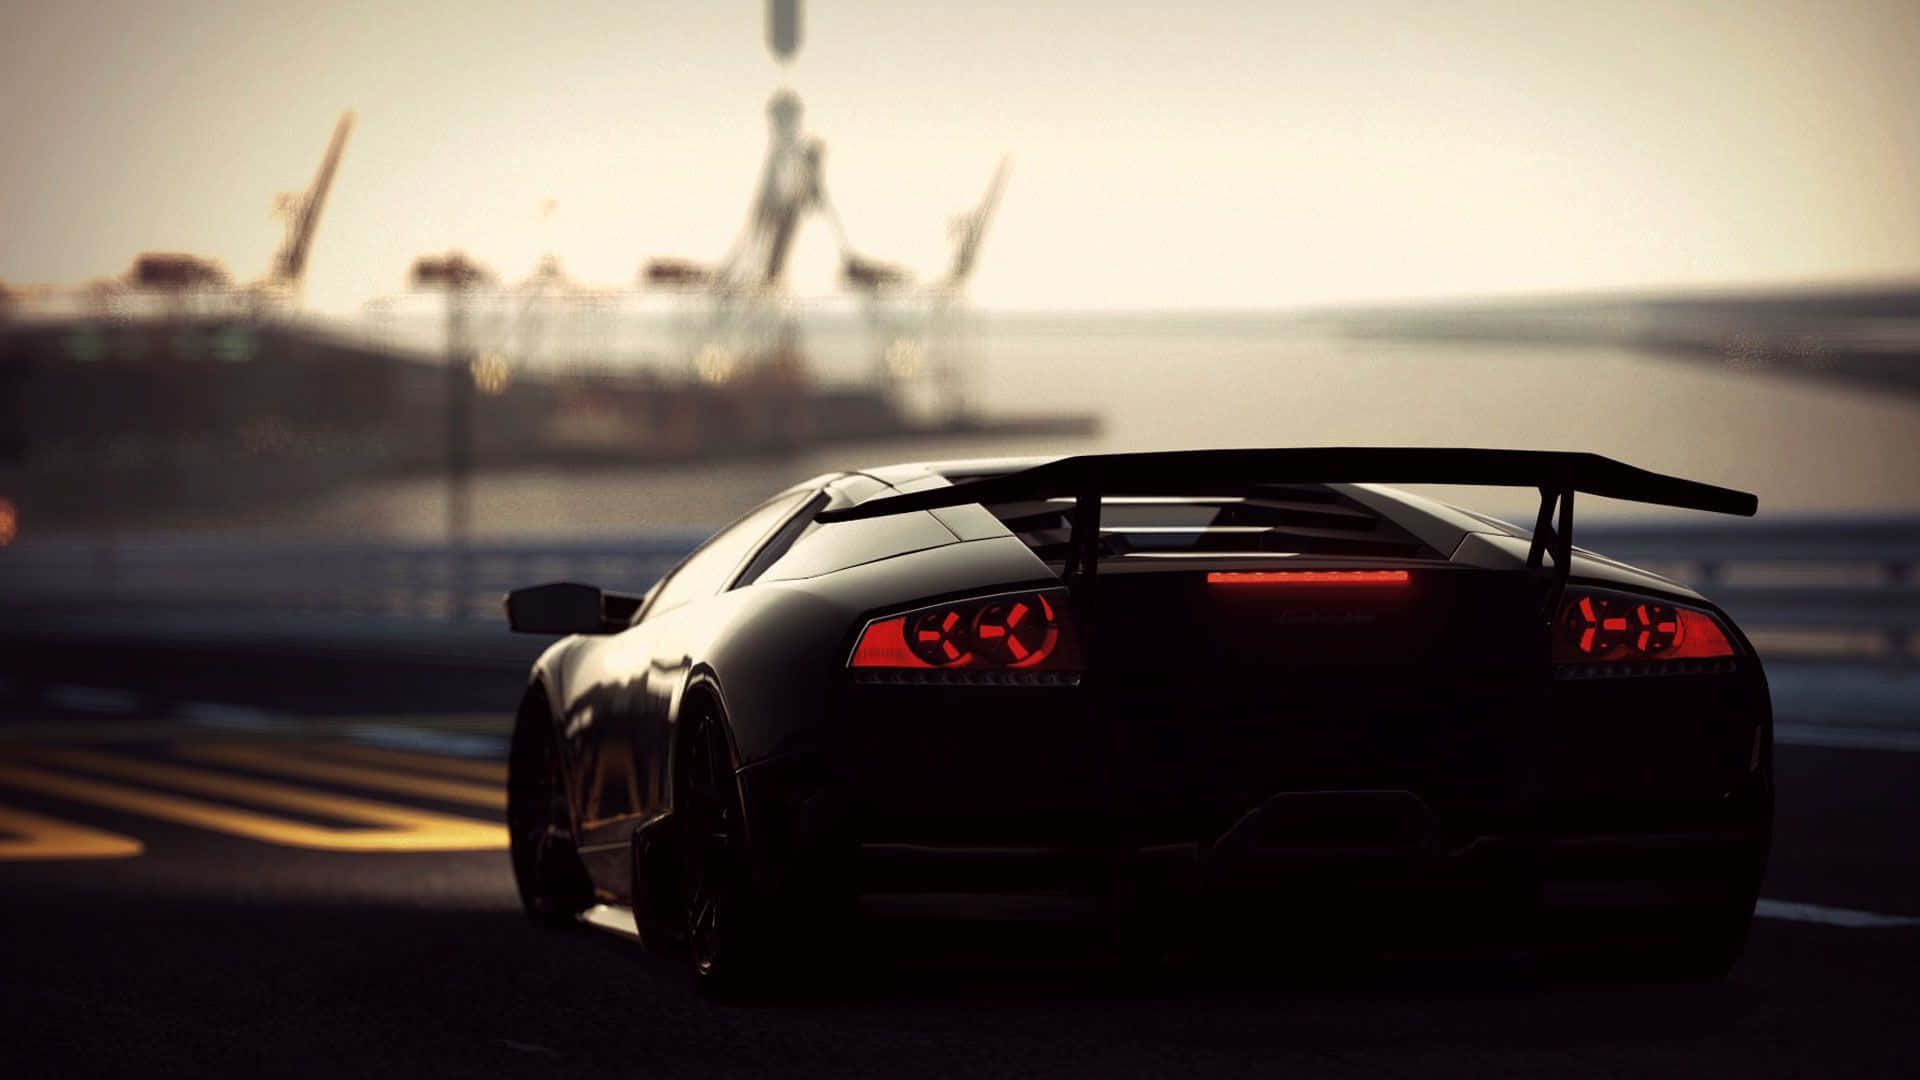 "Feel the power and performance of this cool Lamborghini!" Wallpaper